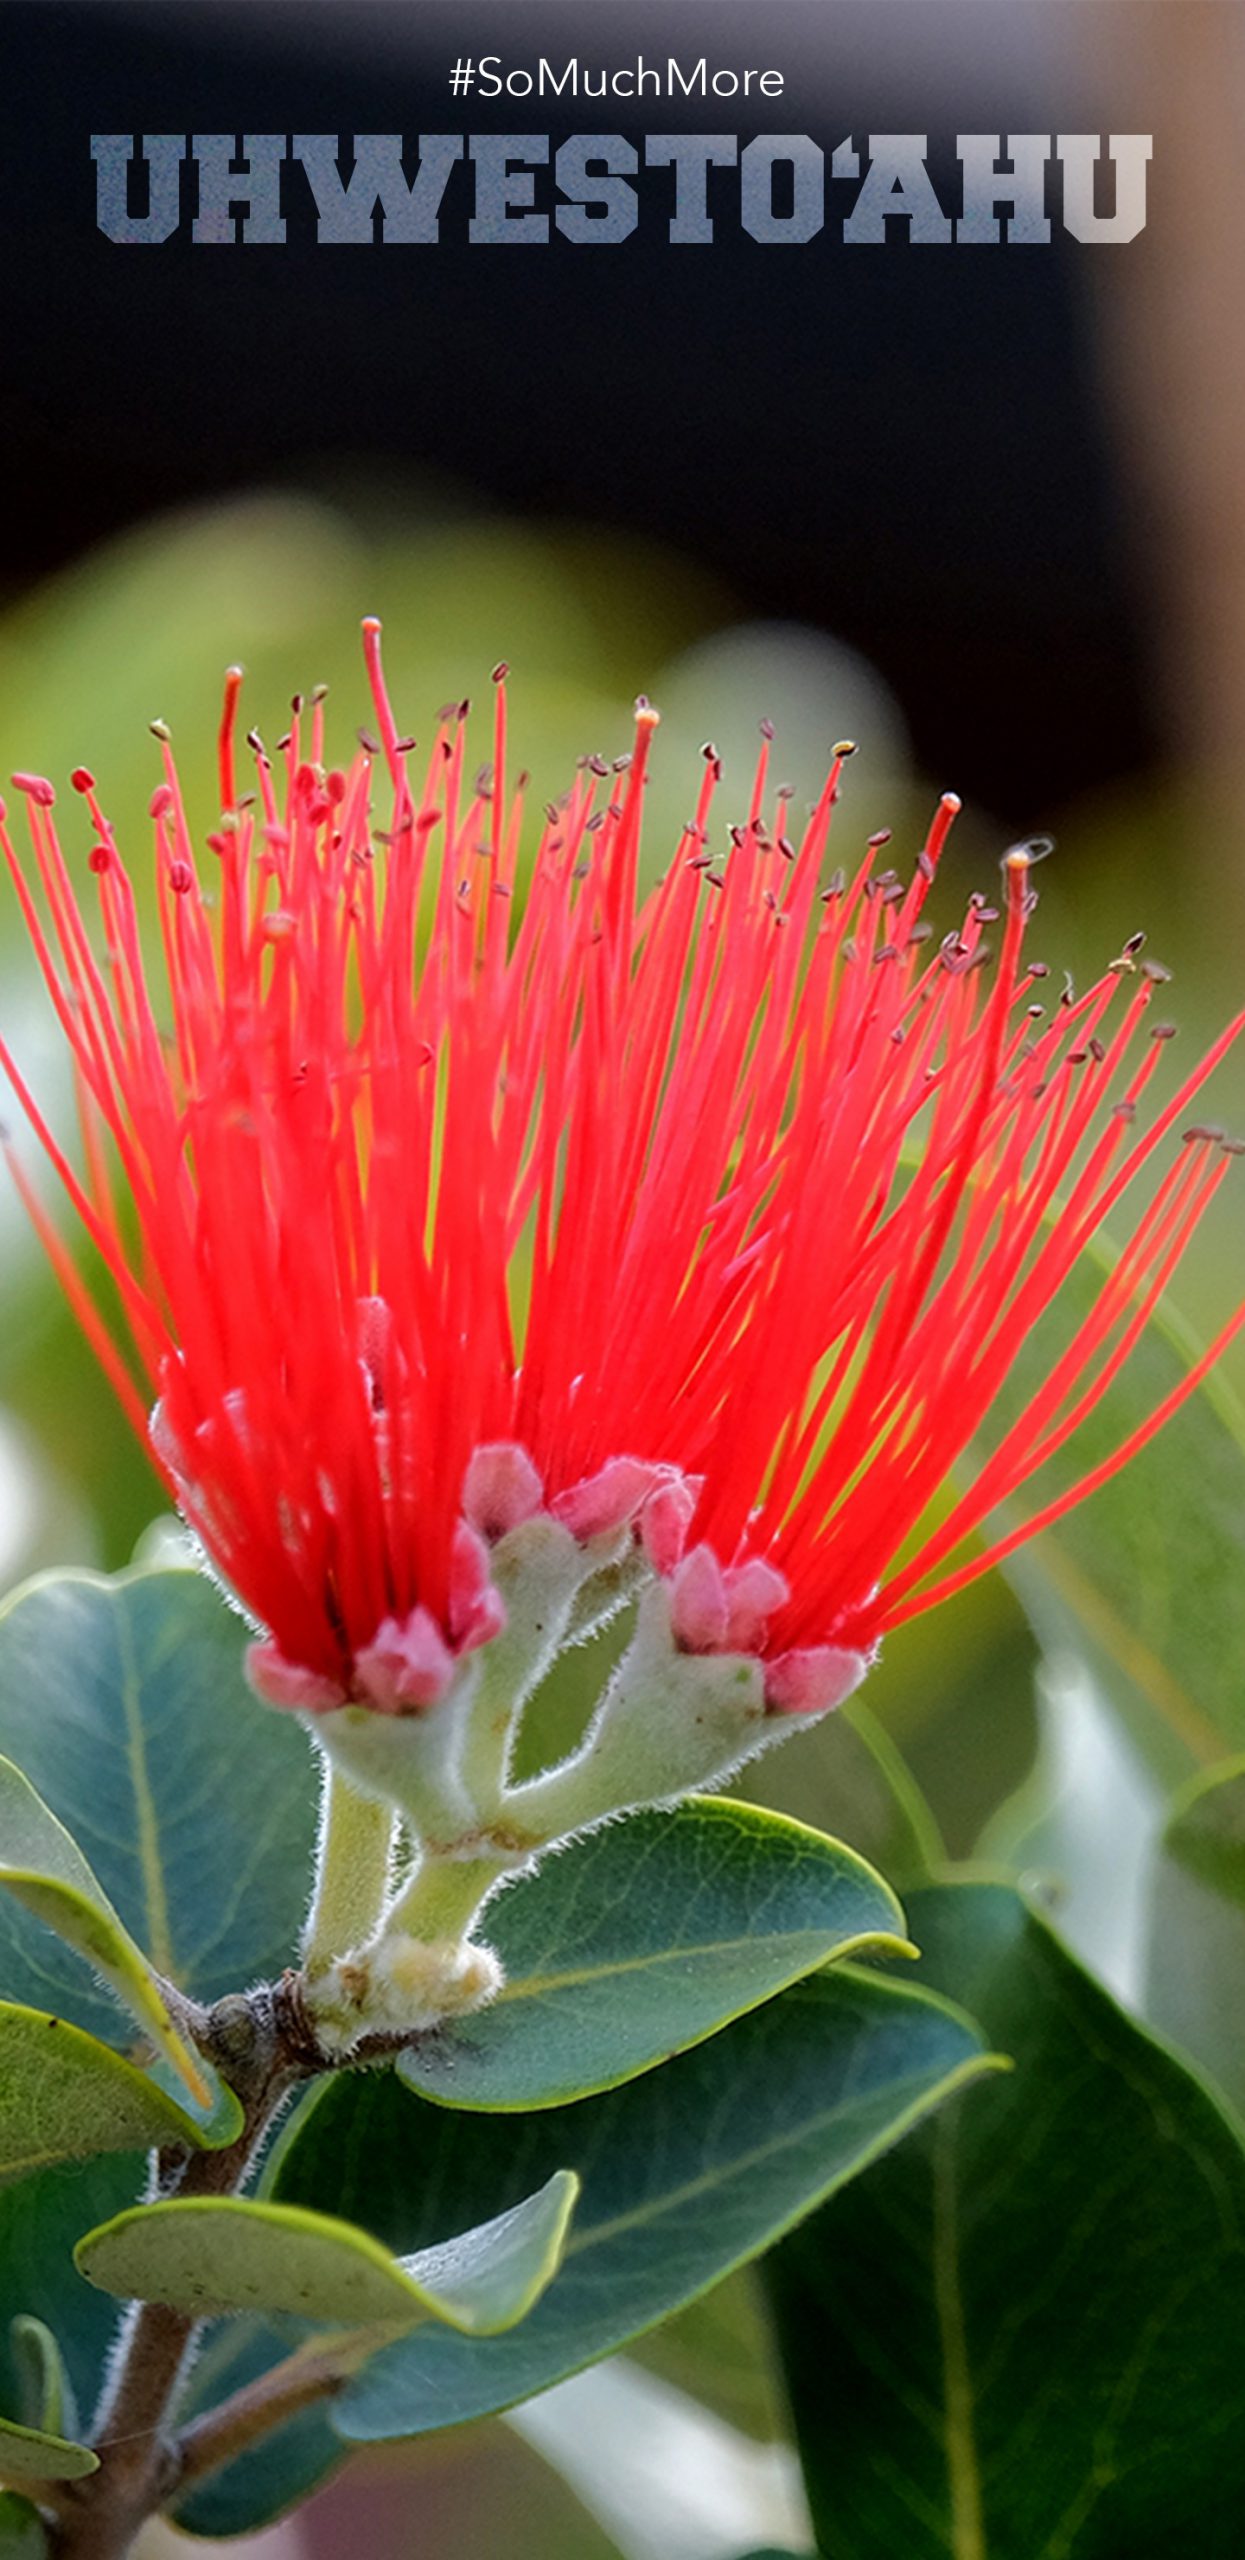 The Red Lehua Flower In The Campus Mala.